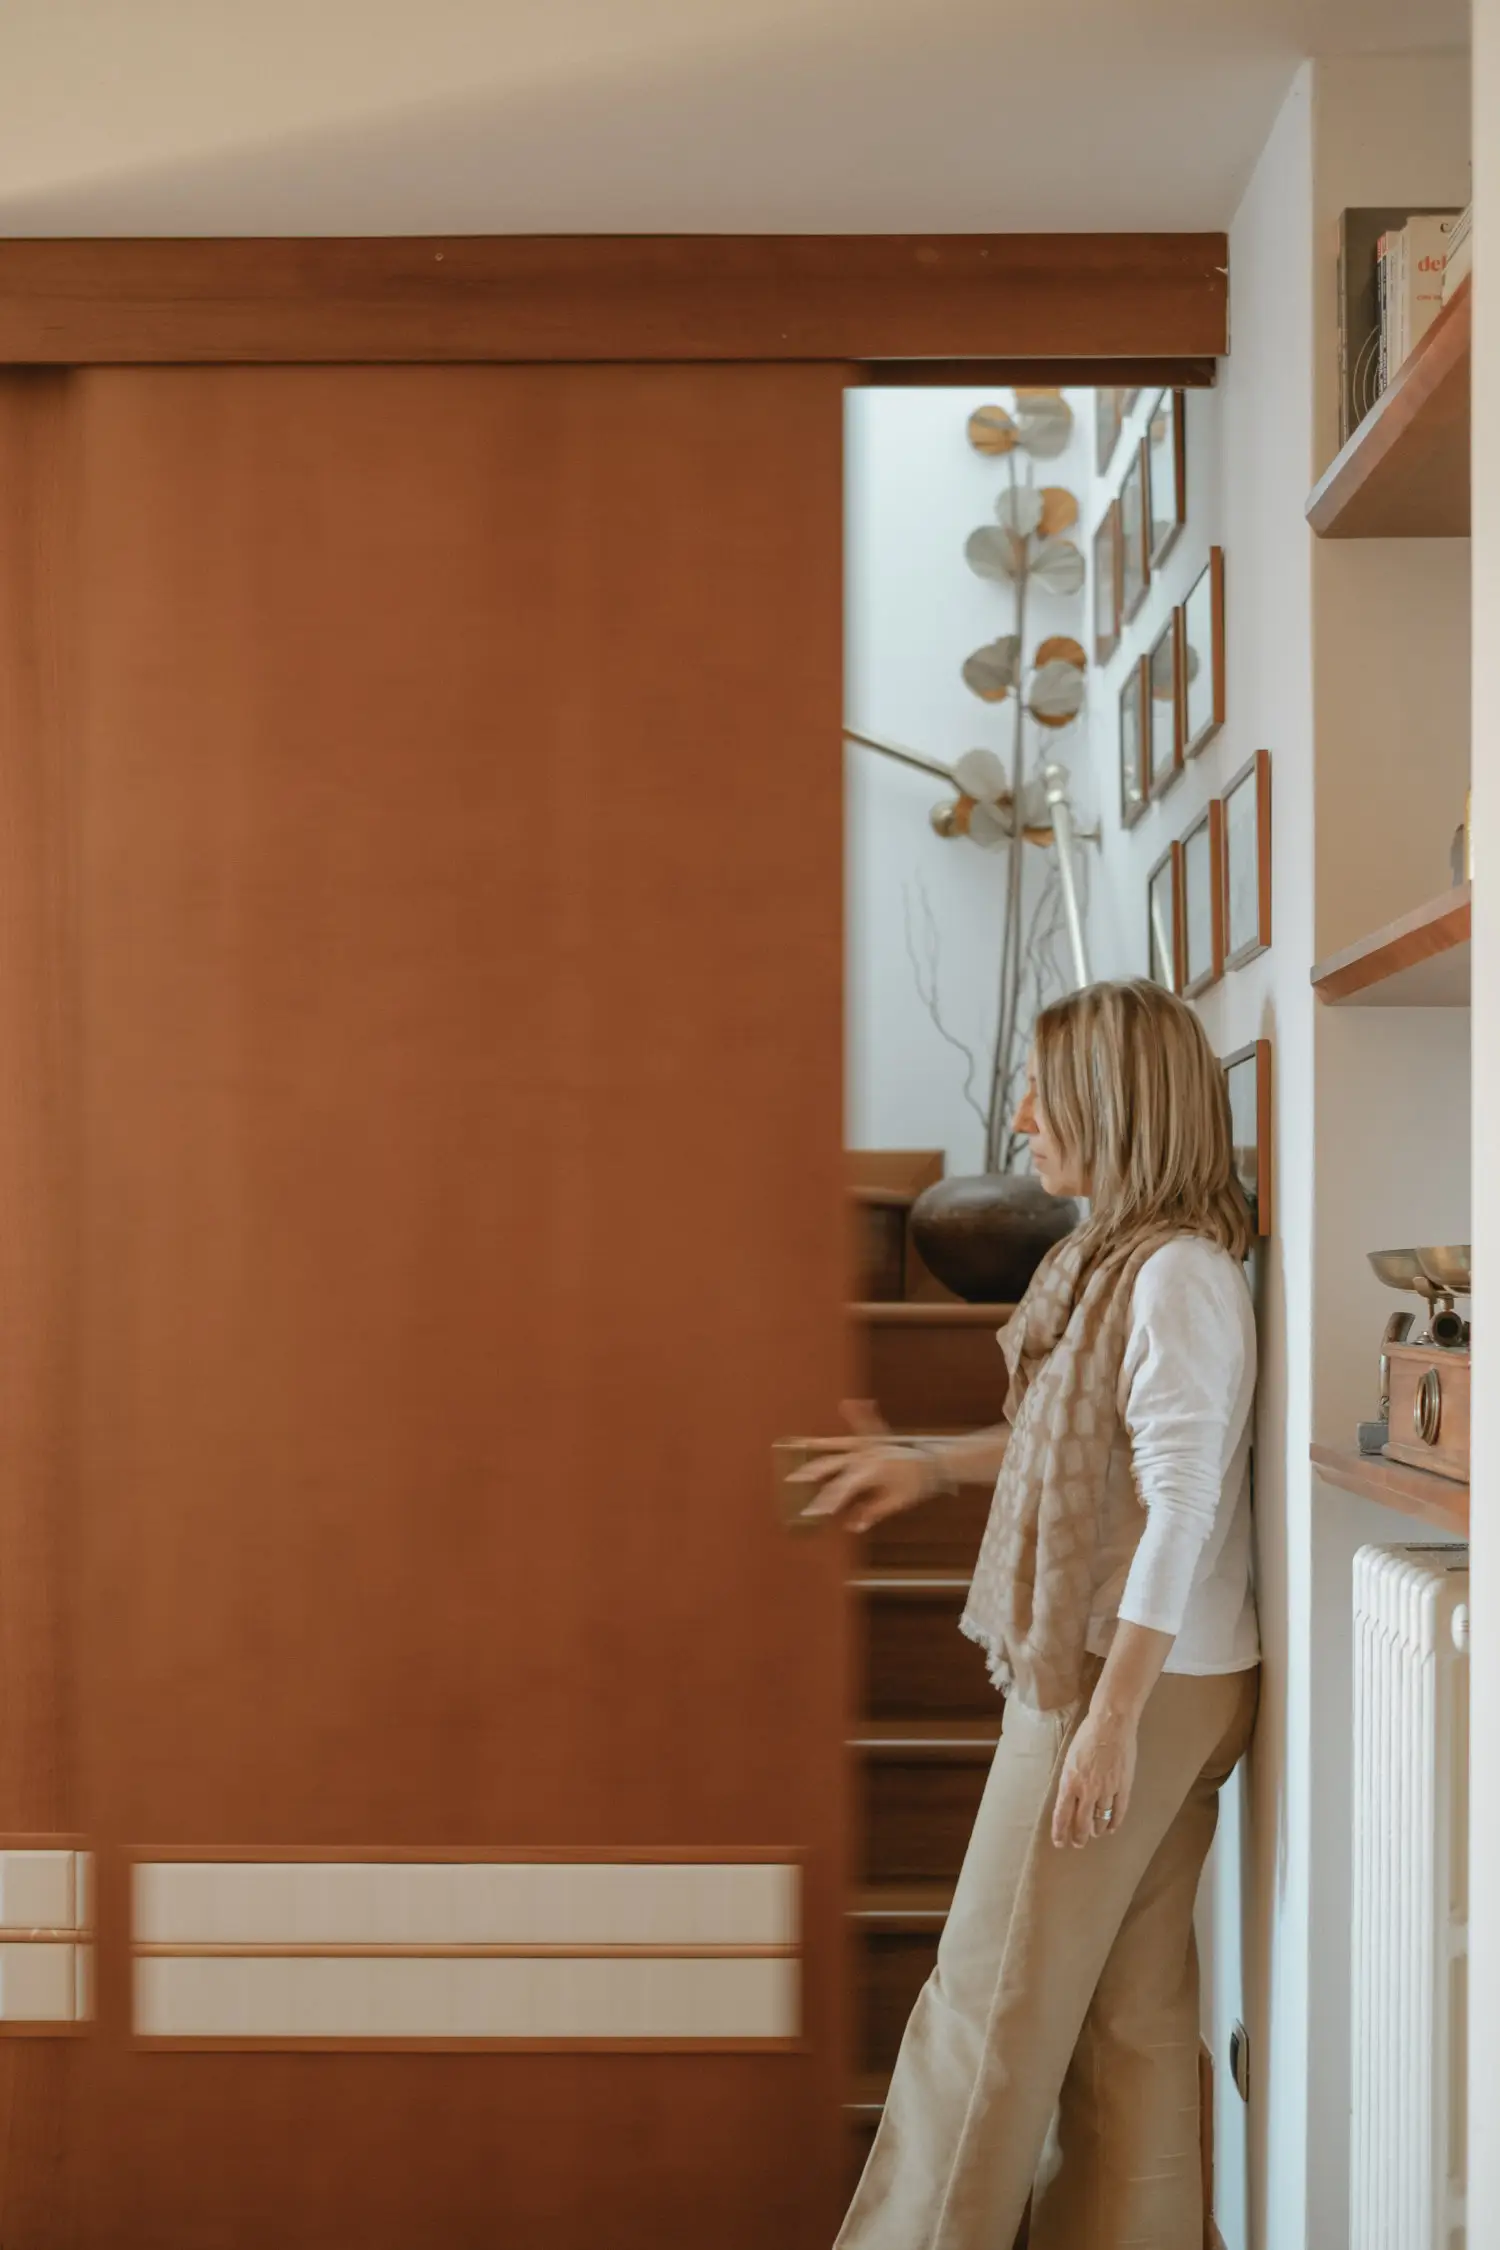 Stefania Luraghi, founder of studio Elles Interior Design , is pictured standing in front of a sliding partition panel she designed.